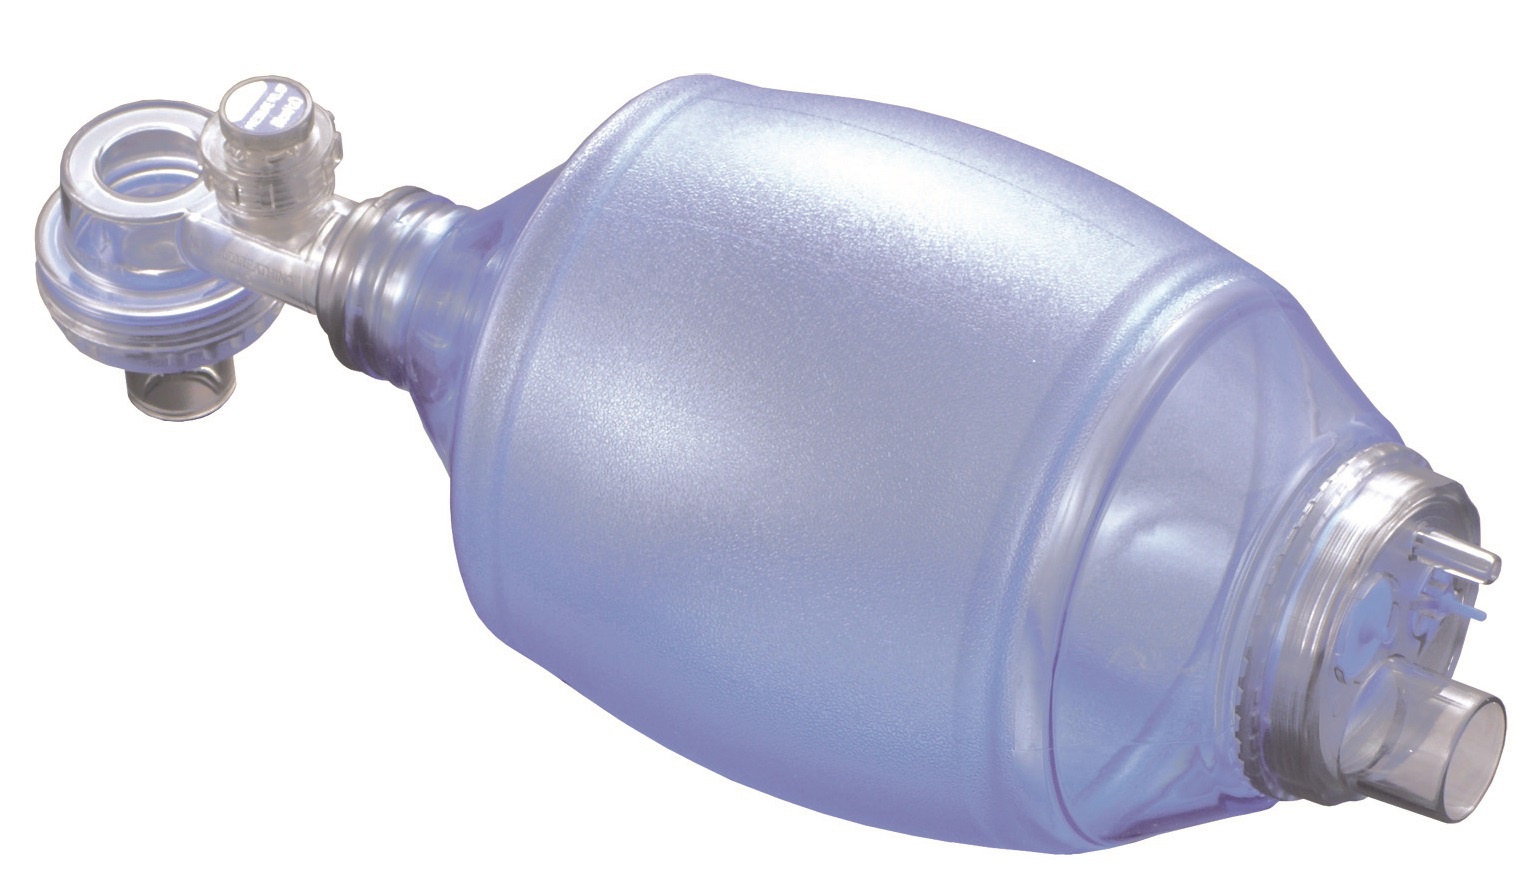 Liberty Disposable Resuscitator with Pop off Valve Mask No. 5 Adult